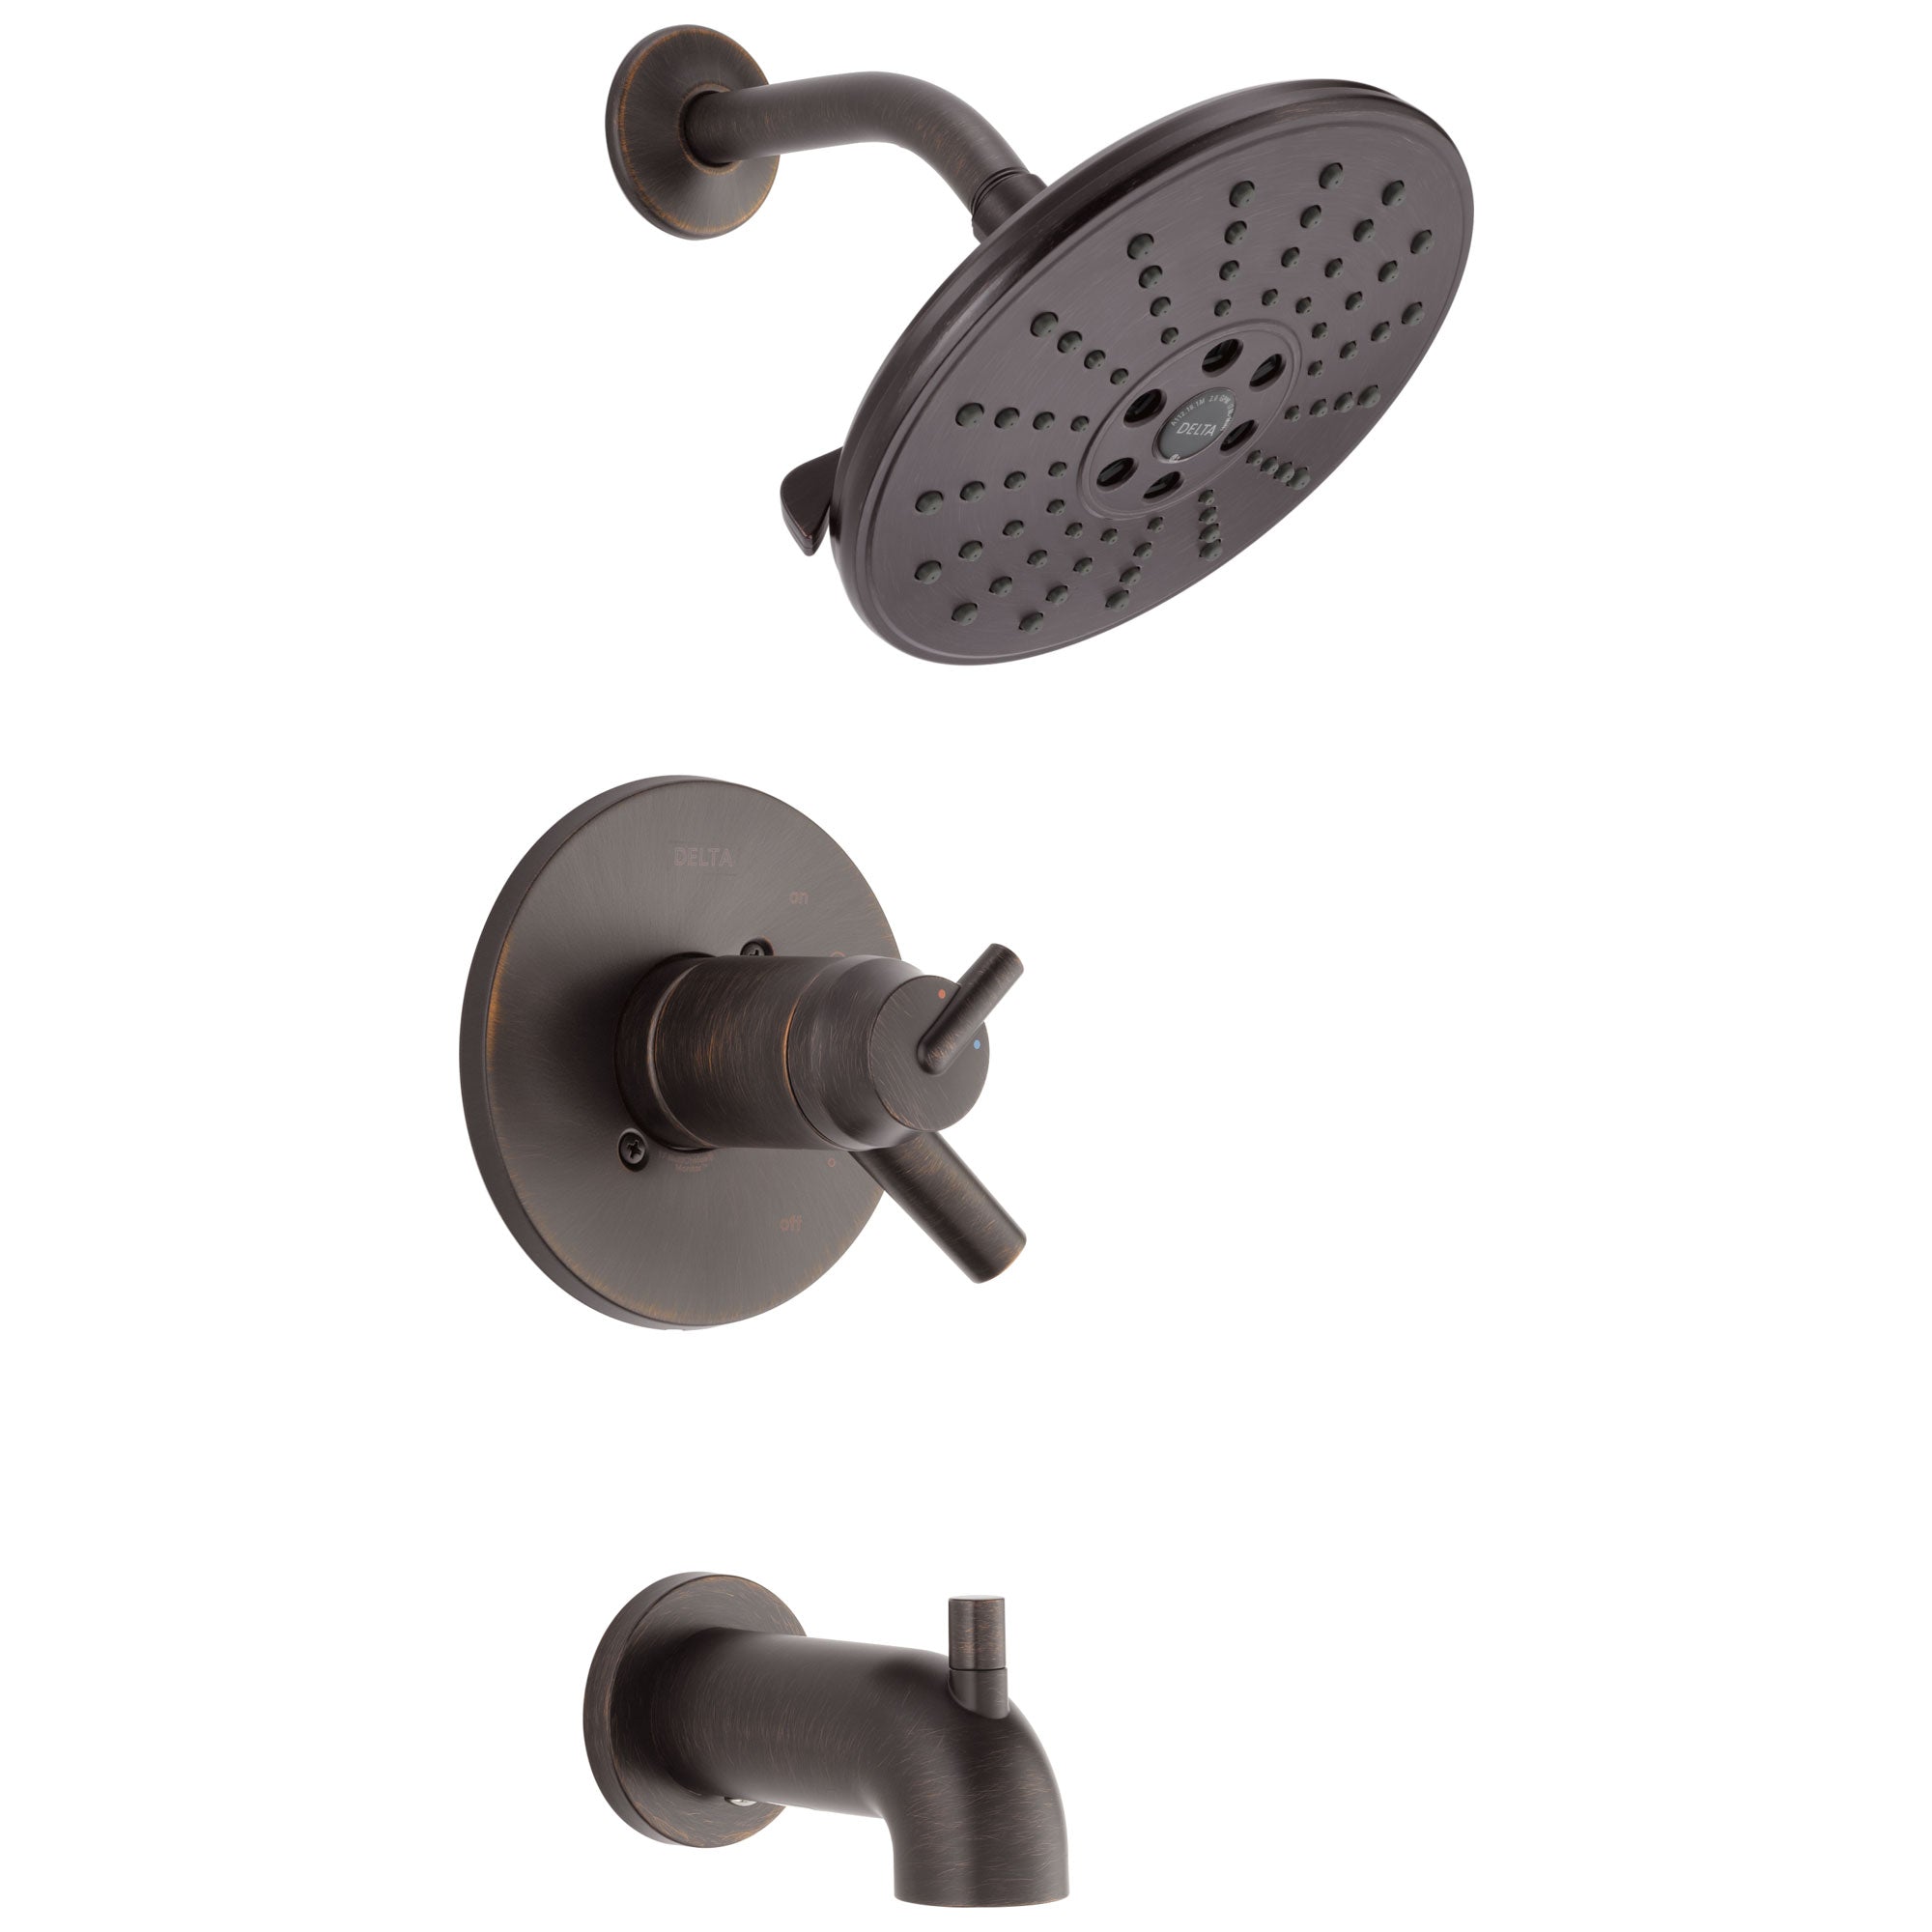 Delta Trinsic Collection Venetian Bronze TempAssure 17T Series Watersense Thermostatic Tub and Shower Combo Faucet Trim (Requires Valve) DT17T459RBH2O